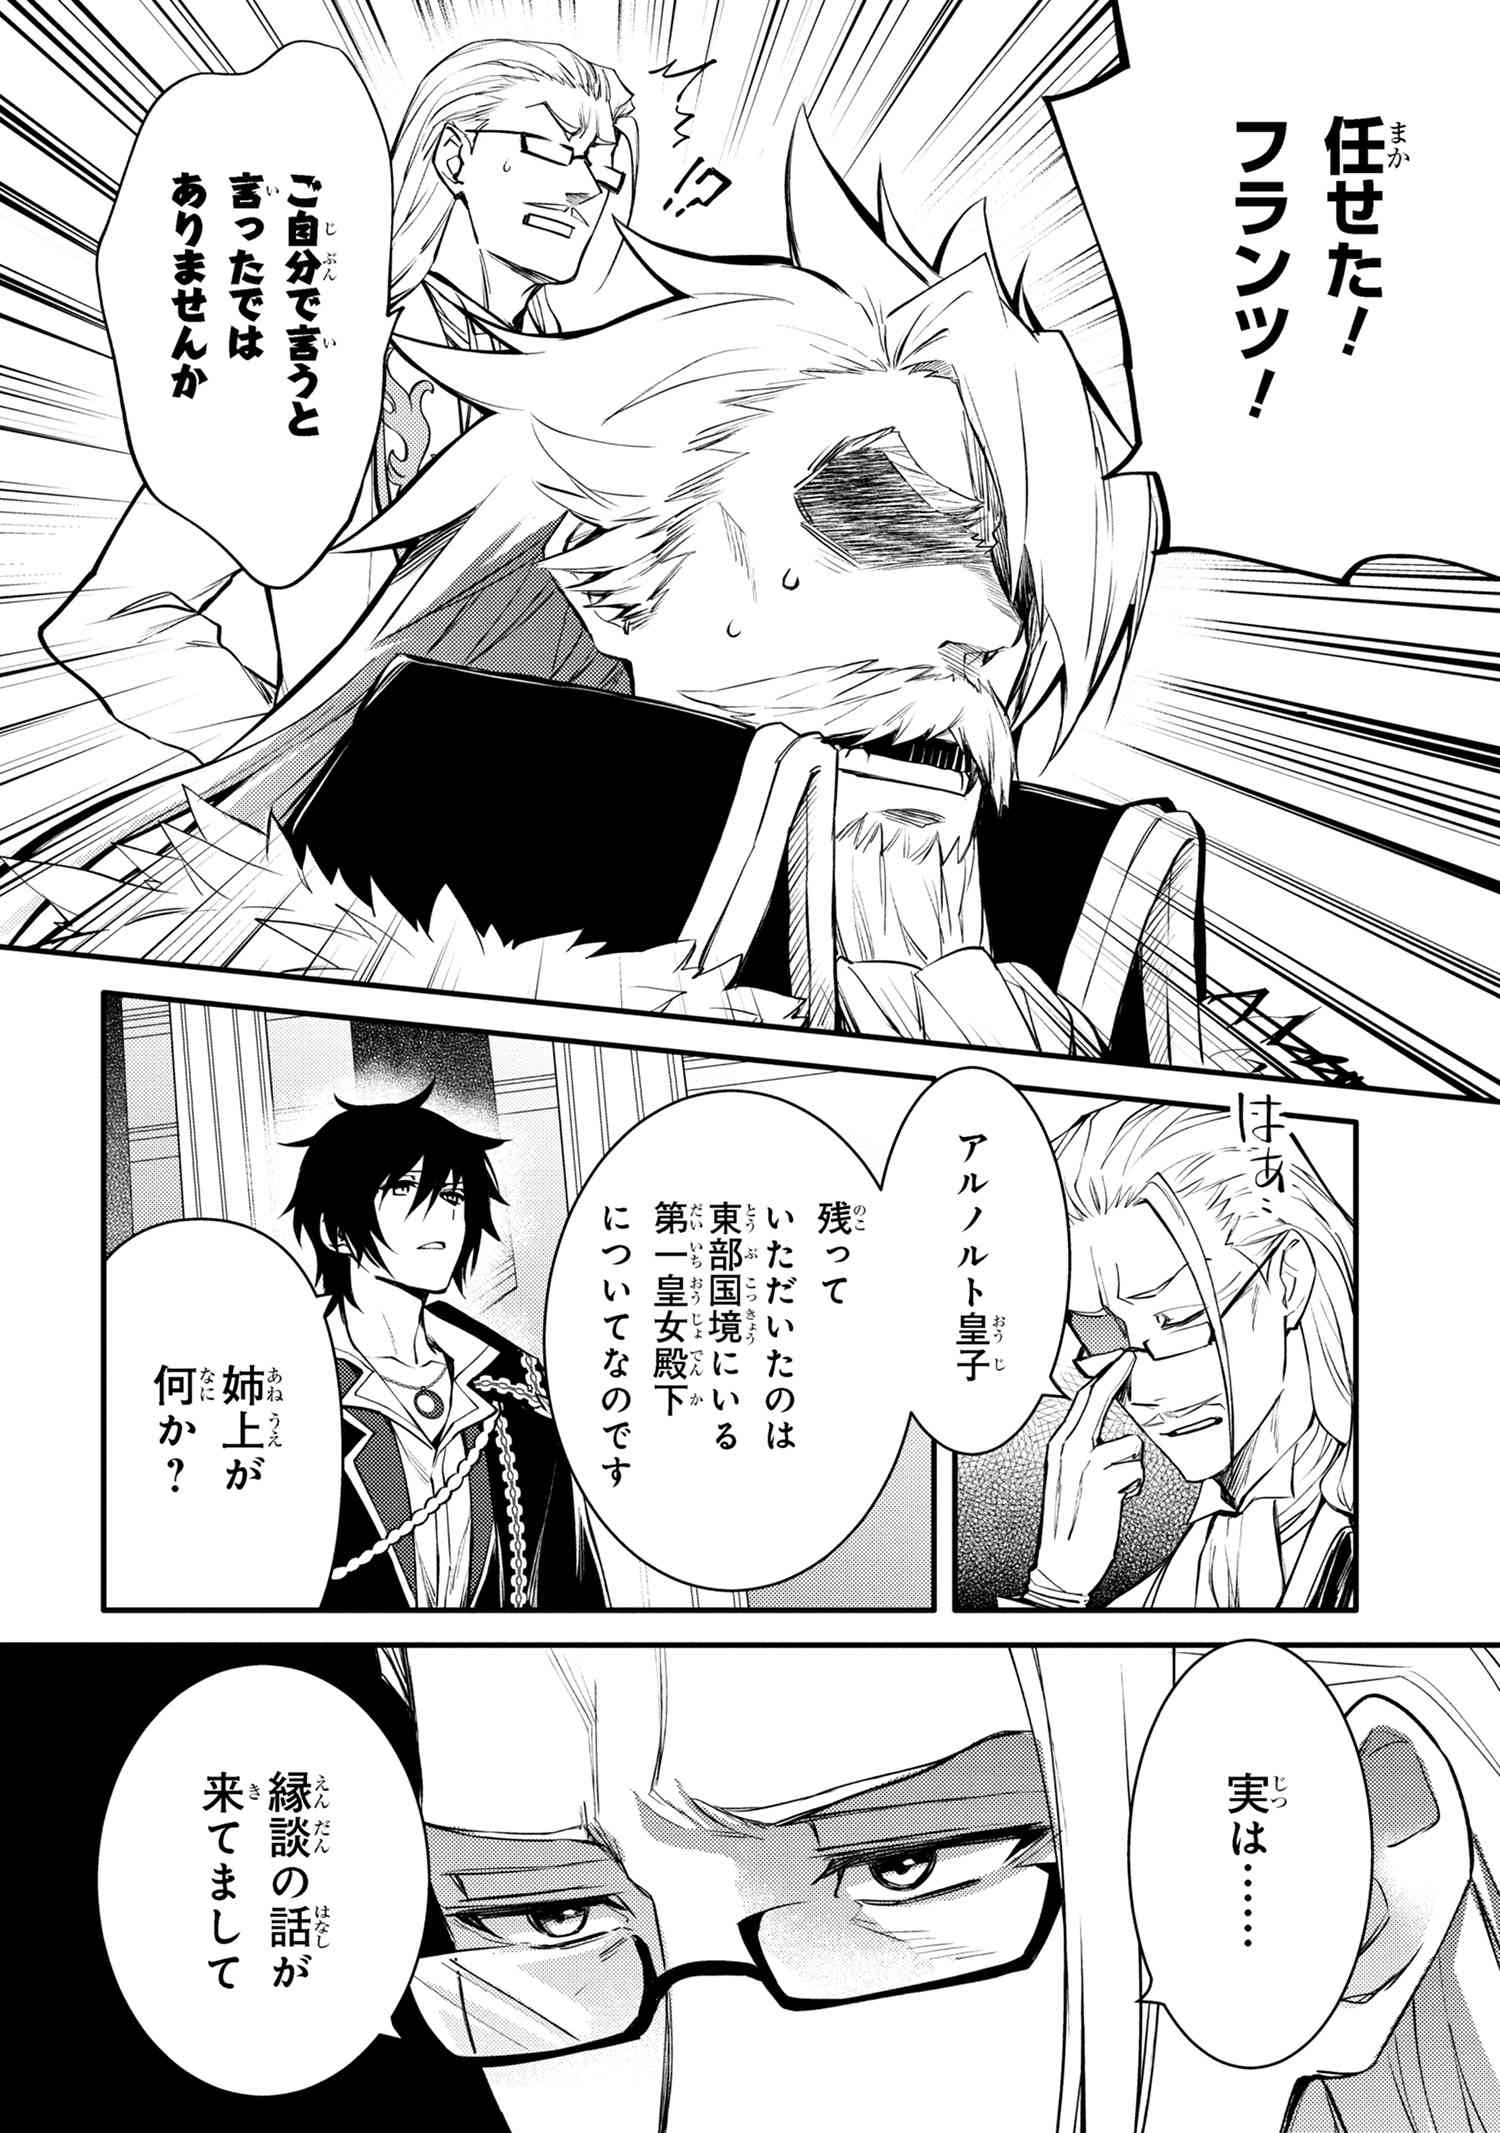 The Strongest Dull Prince’s Secret Battle for the Throne - Chapter 41.1 - Page 2